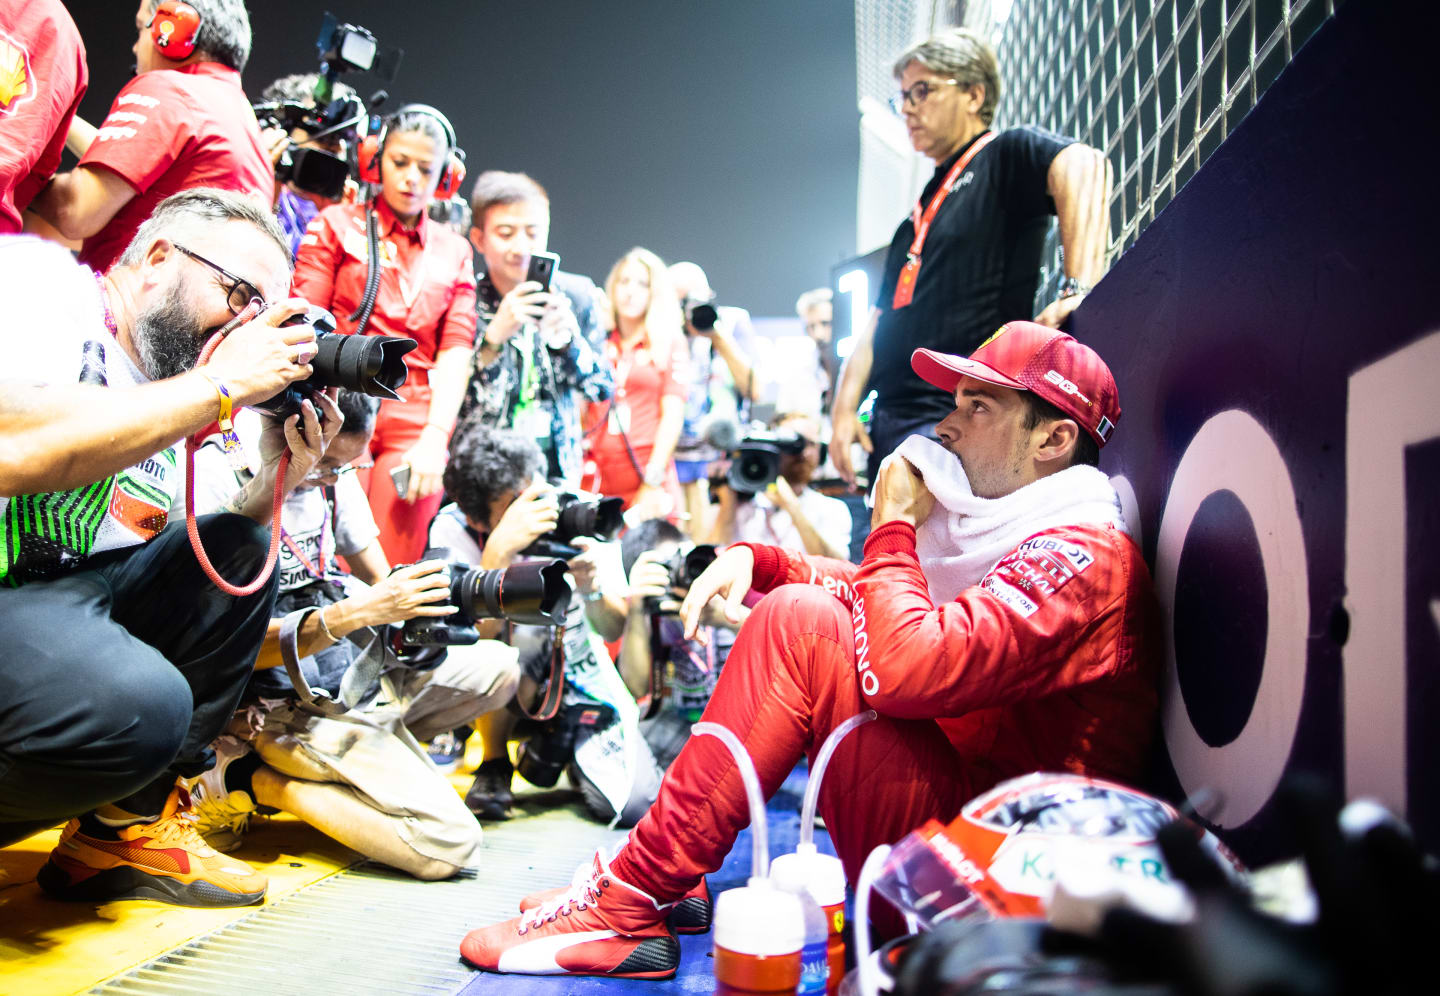 SINGAPORE, SINGAPORE - SEPTEMBER 22: Charles Leclerc of Monaco and Ferrari prepares to drive on the grid before the F1 Grand Prix of Singapore at Marina Bay Street Circuit on September 22, 2019 in Singapore. (Photo by Lars Baron/Getty Images)